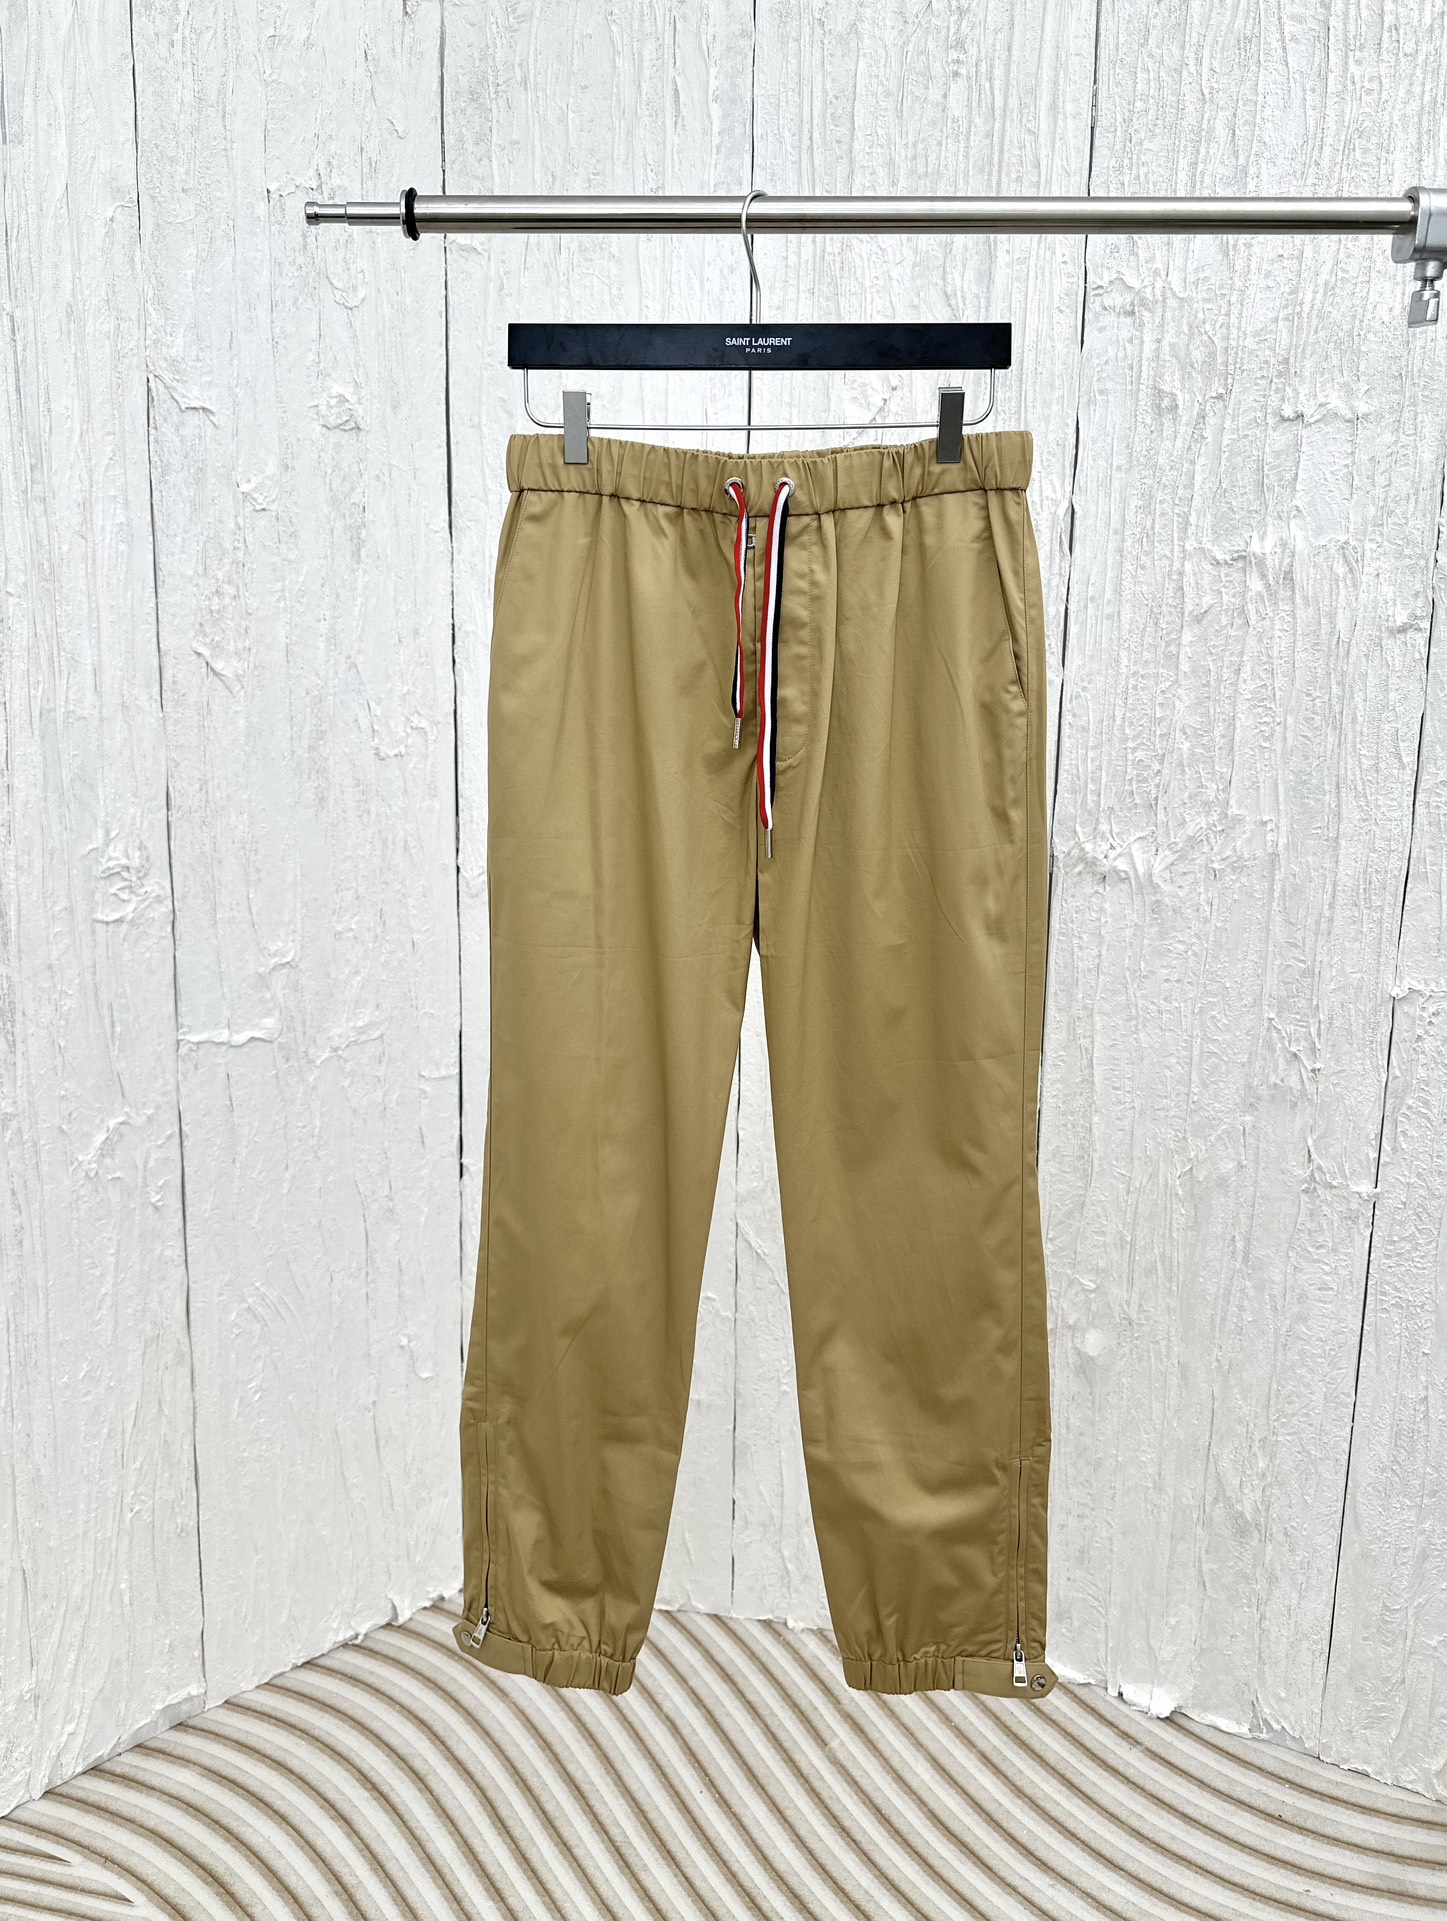 Moncler Clothing Pants & Trousers Beige Men Cotton Spring/Summer Collection Fashion Casual